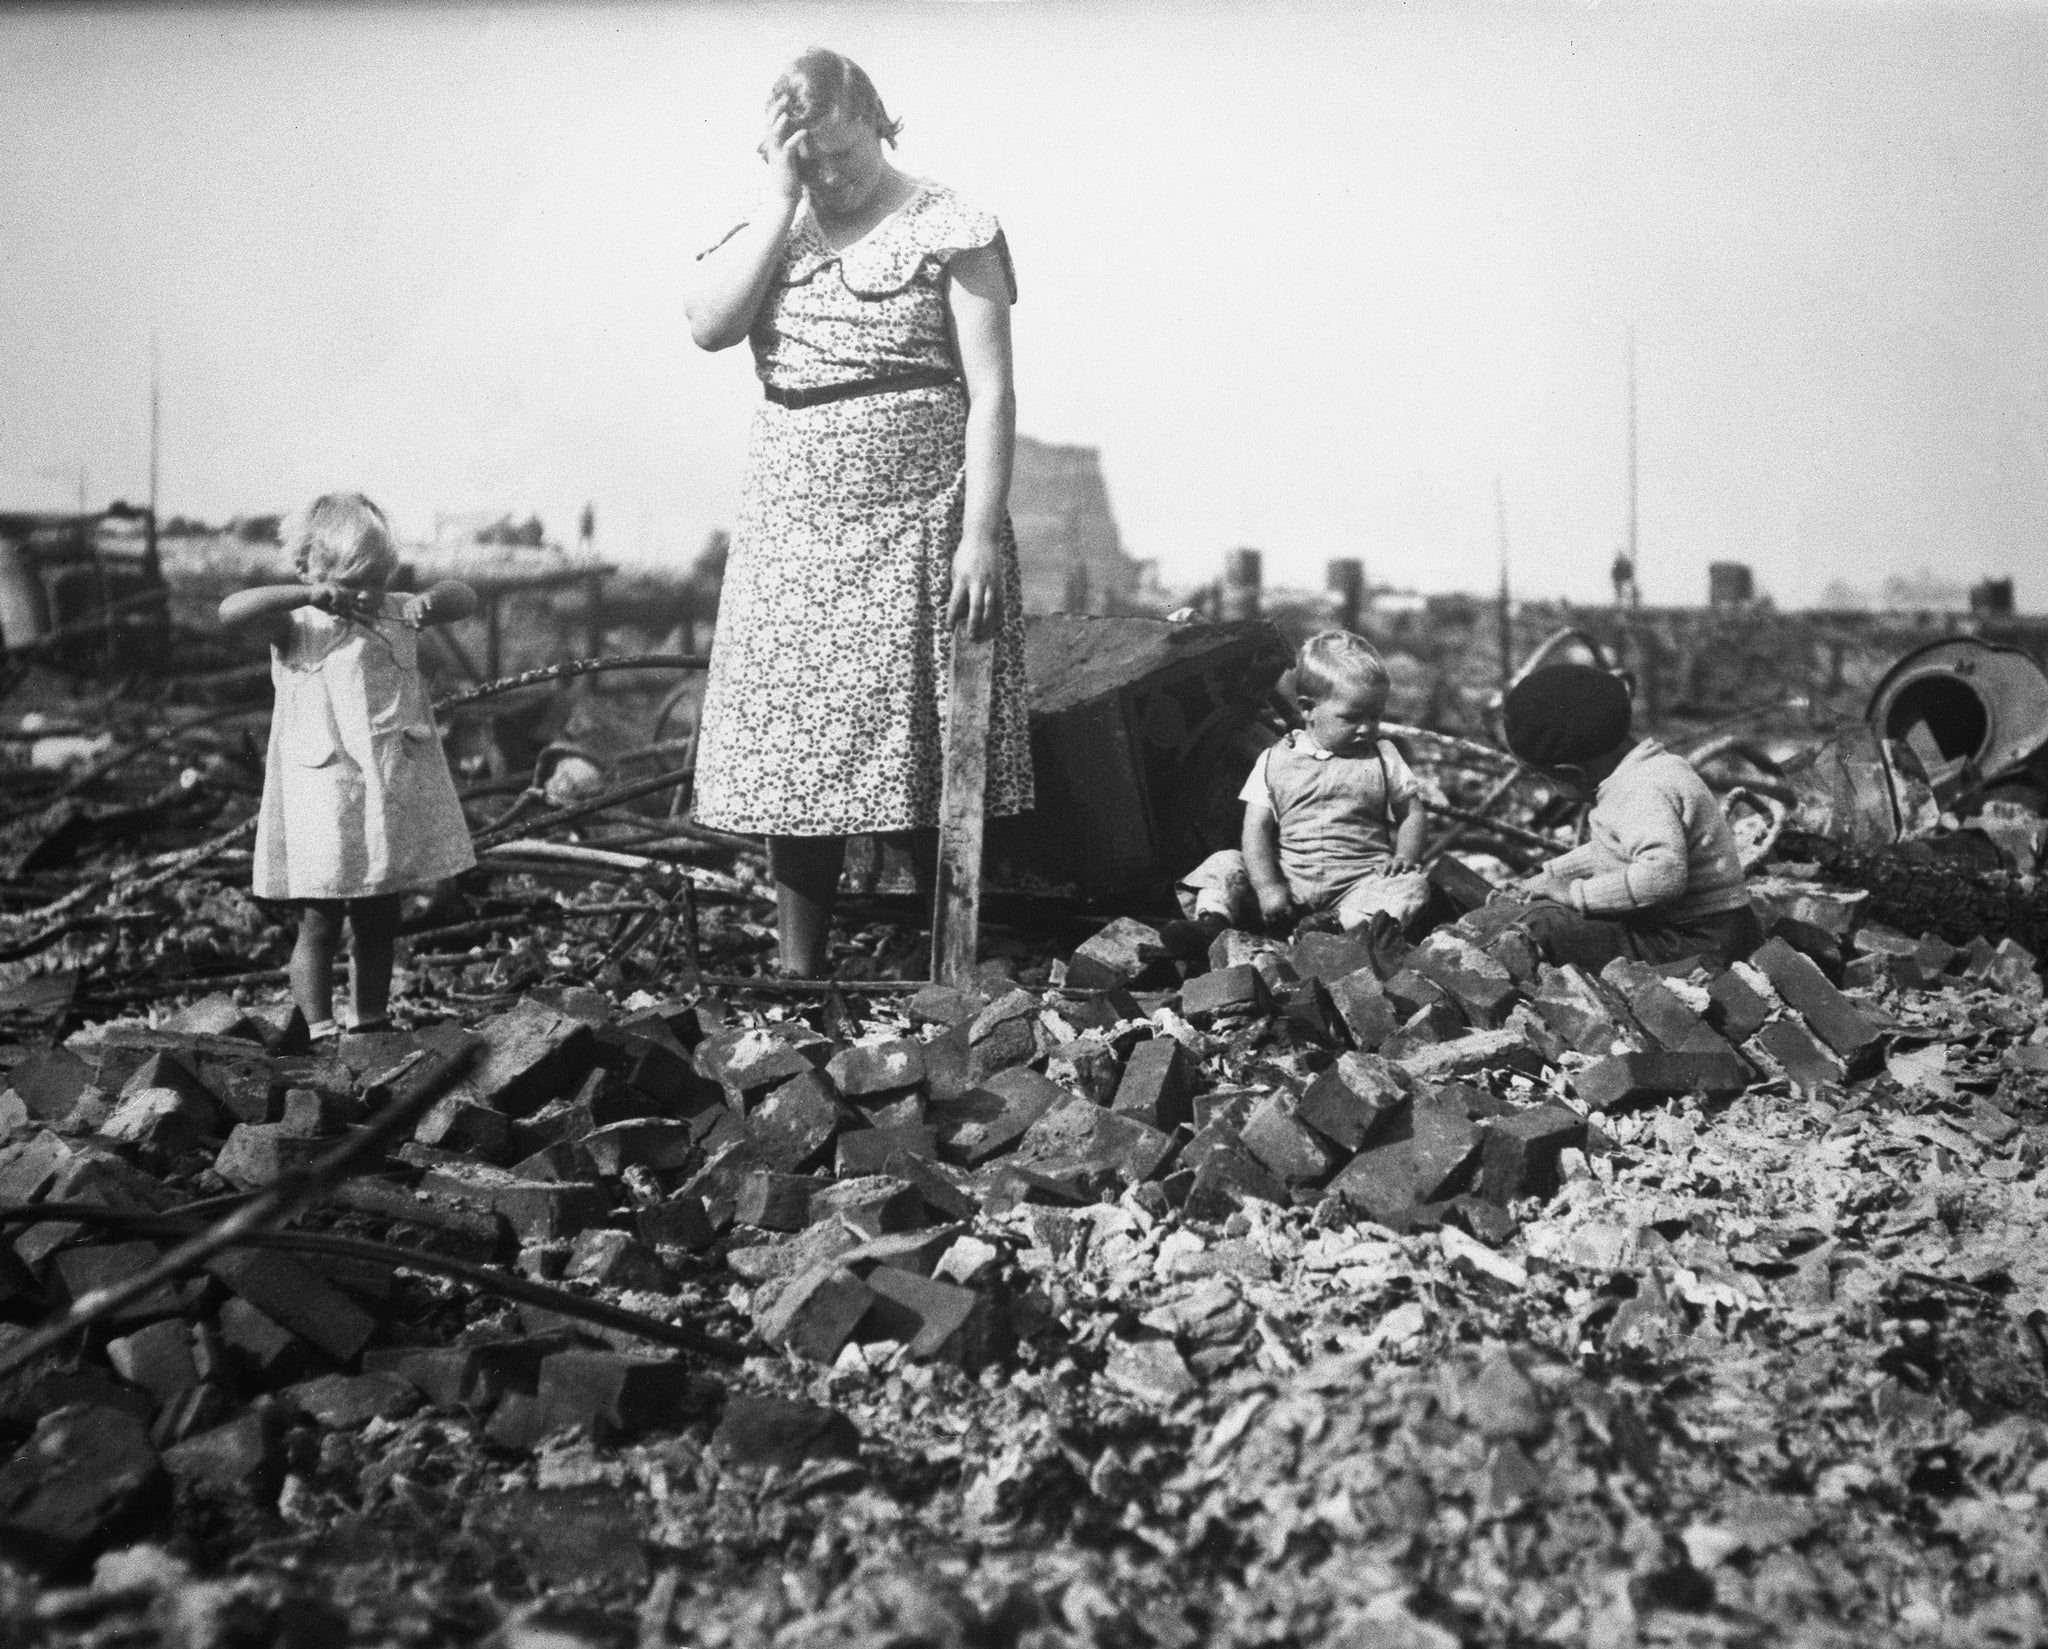 Grace Lawson with her children Dollie, Harry and Fritz search through the rubble of their home after the 1936 Bandon fire. -- Courtesy Coos History Museum & Maritime Collection / #992-8-2216